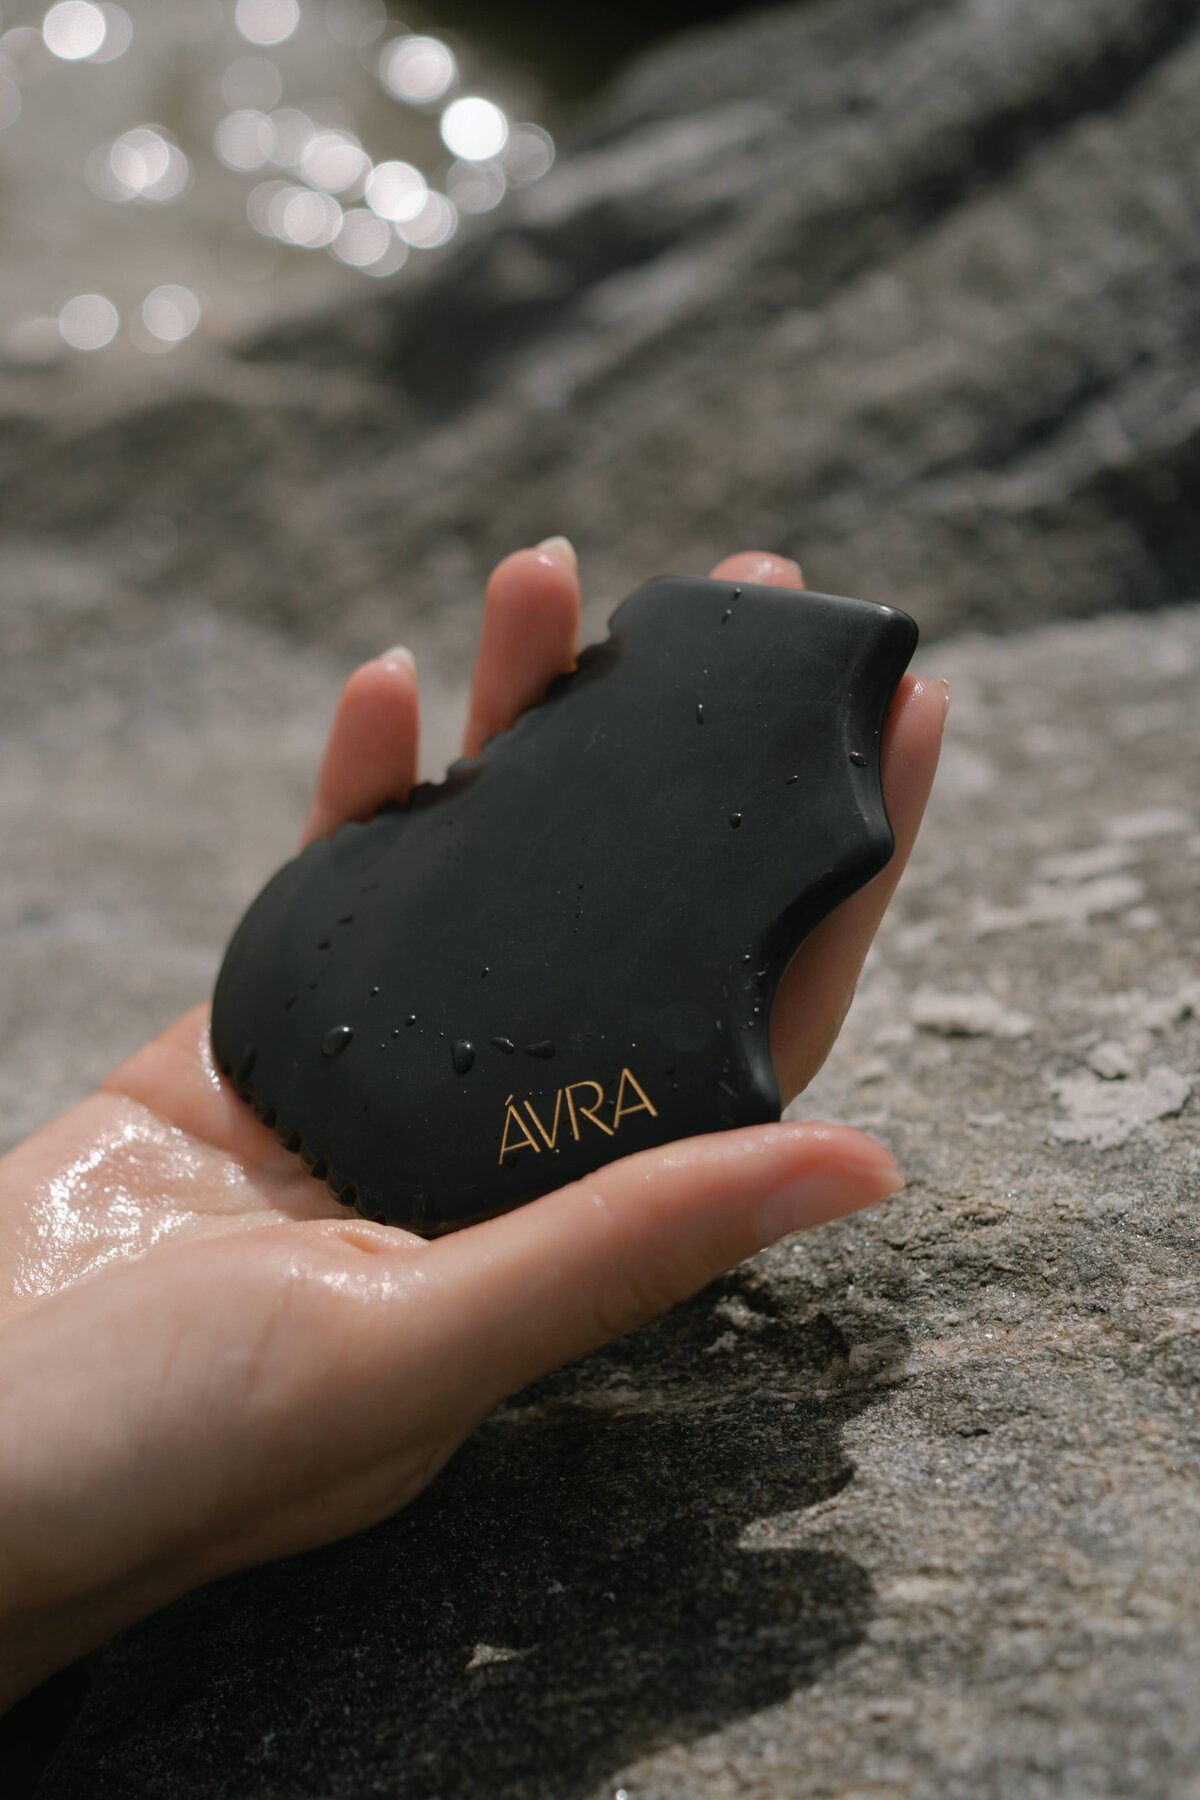 Best gua sha stones for face sculpting review by Alex Perry conscious creator for sustainable 